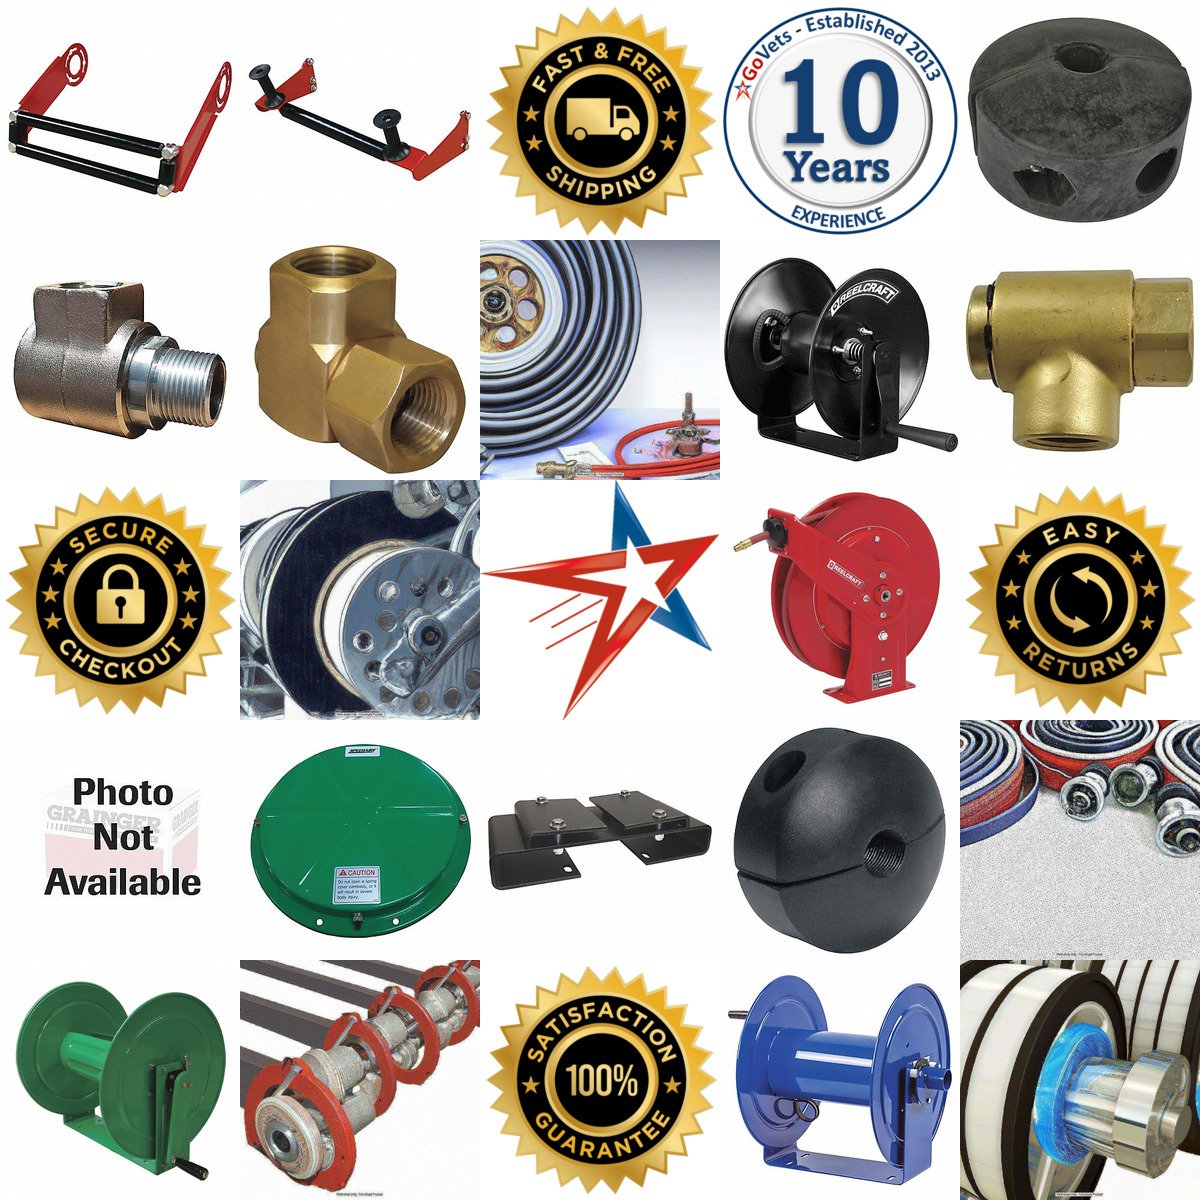 A selection of Hose Reels and Accessories products on GoVets